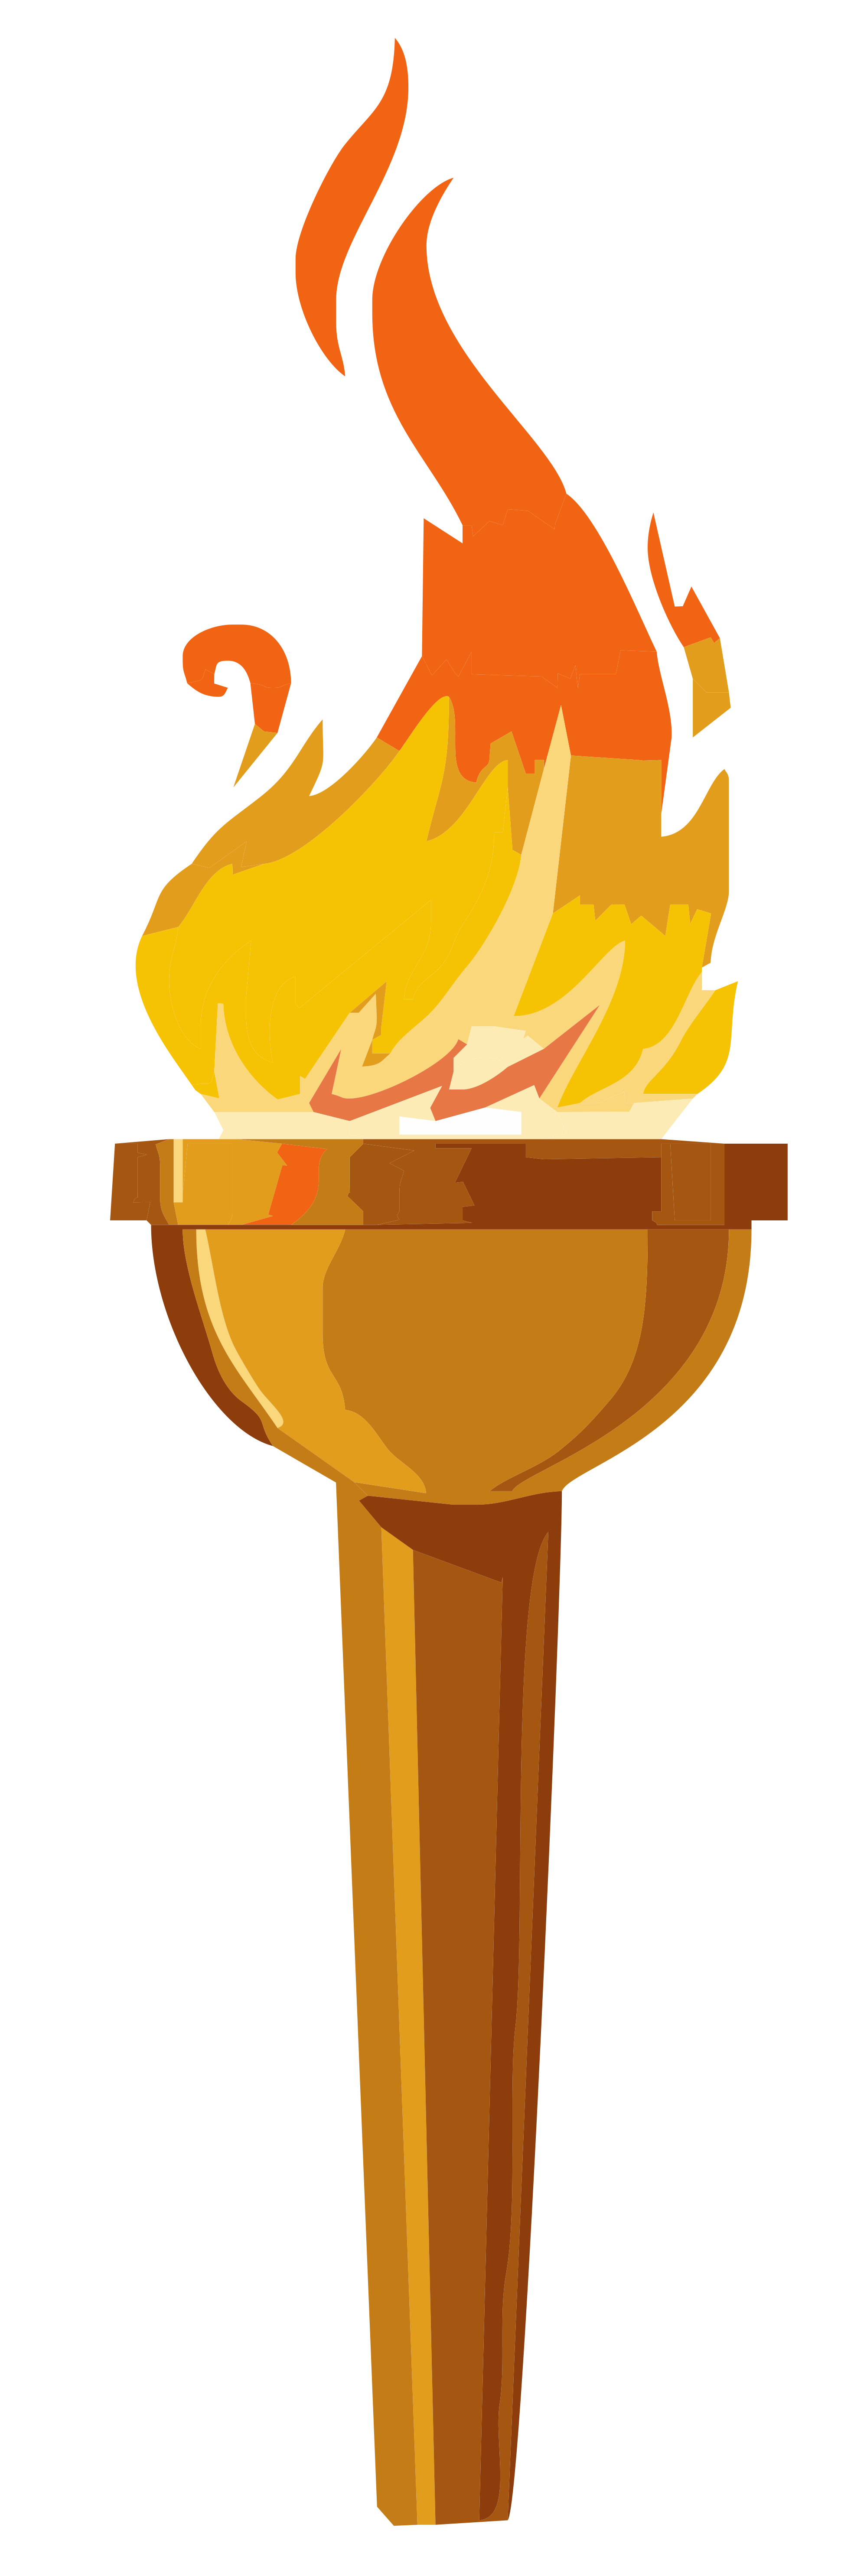 pin Torch clipart icon #4